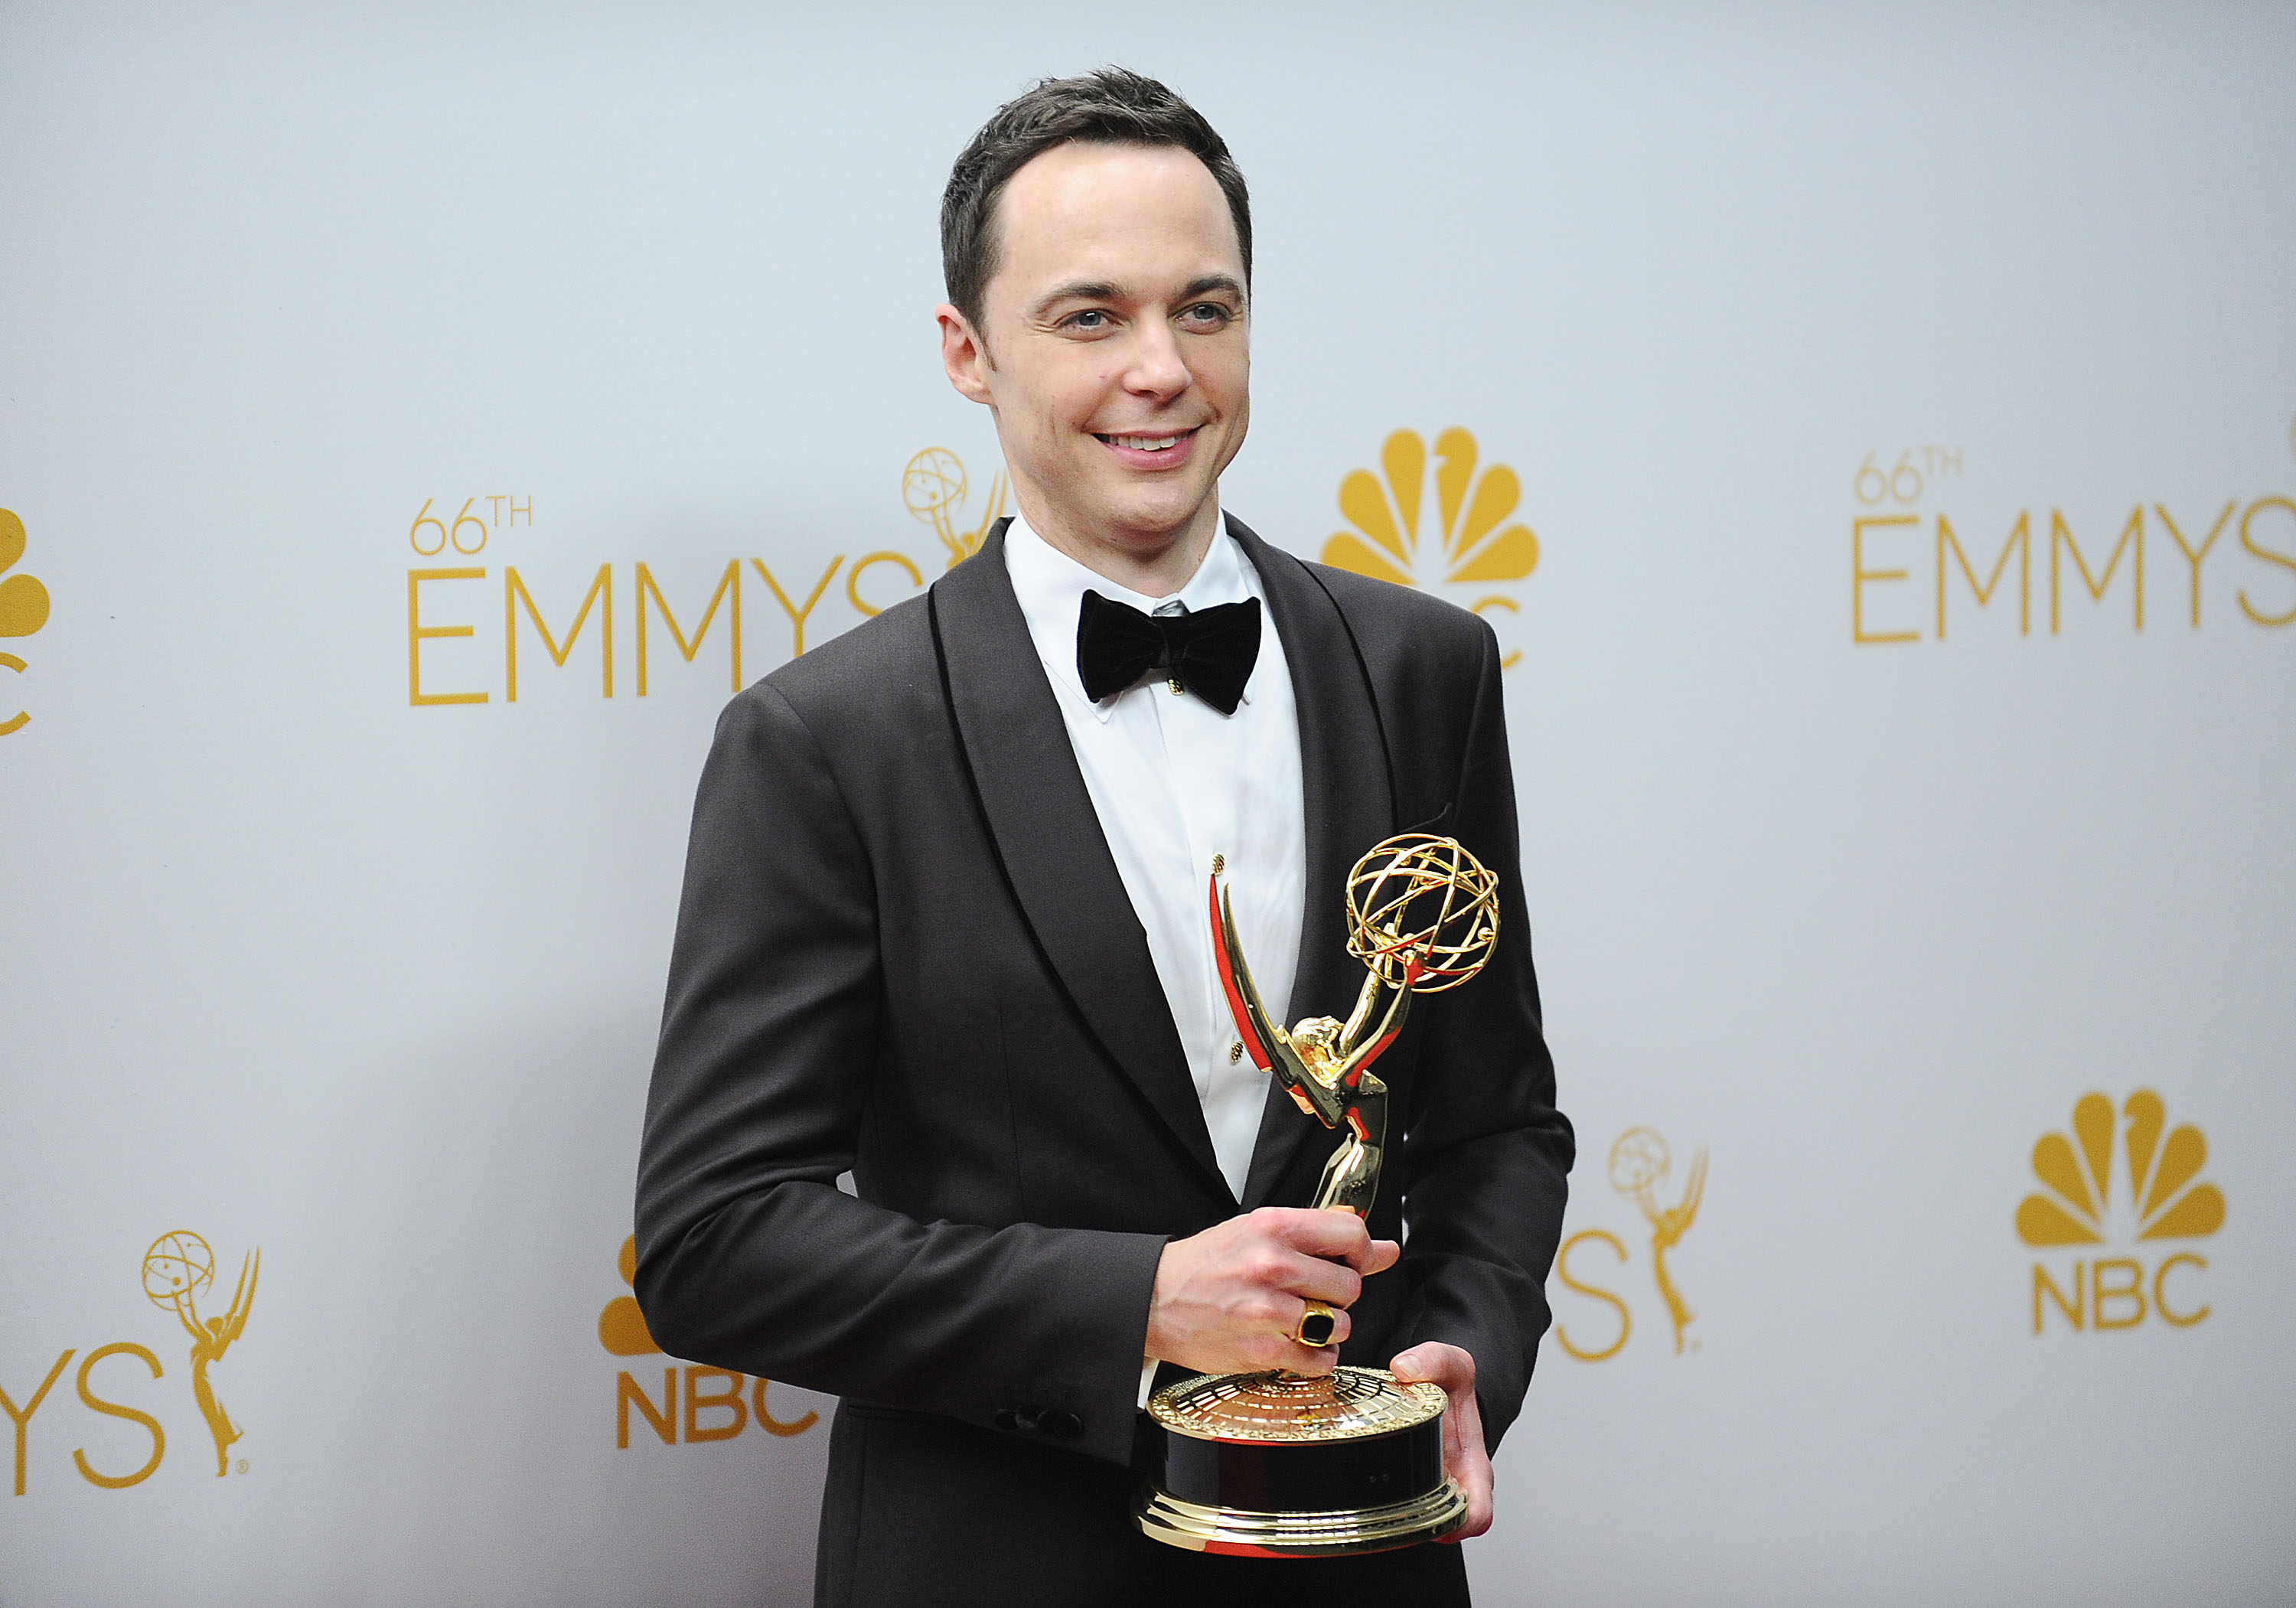 This is a photo of TV actor Jim Parsons.